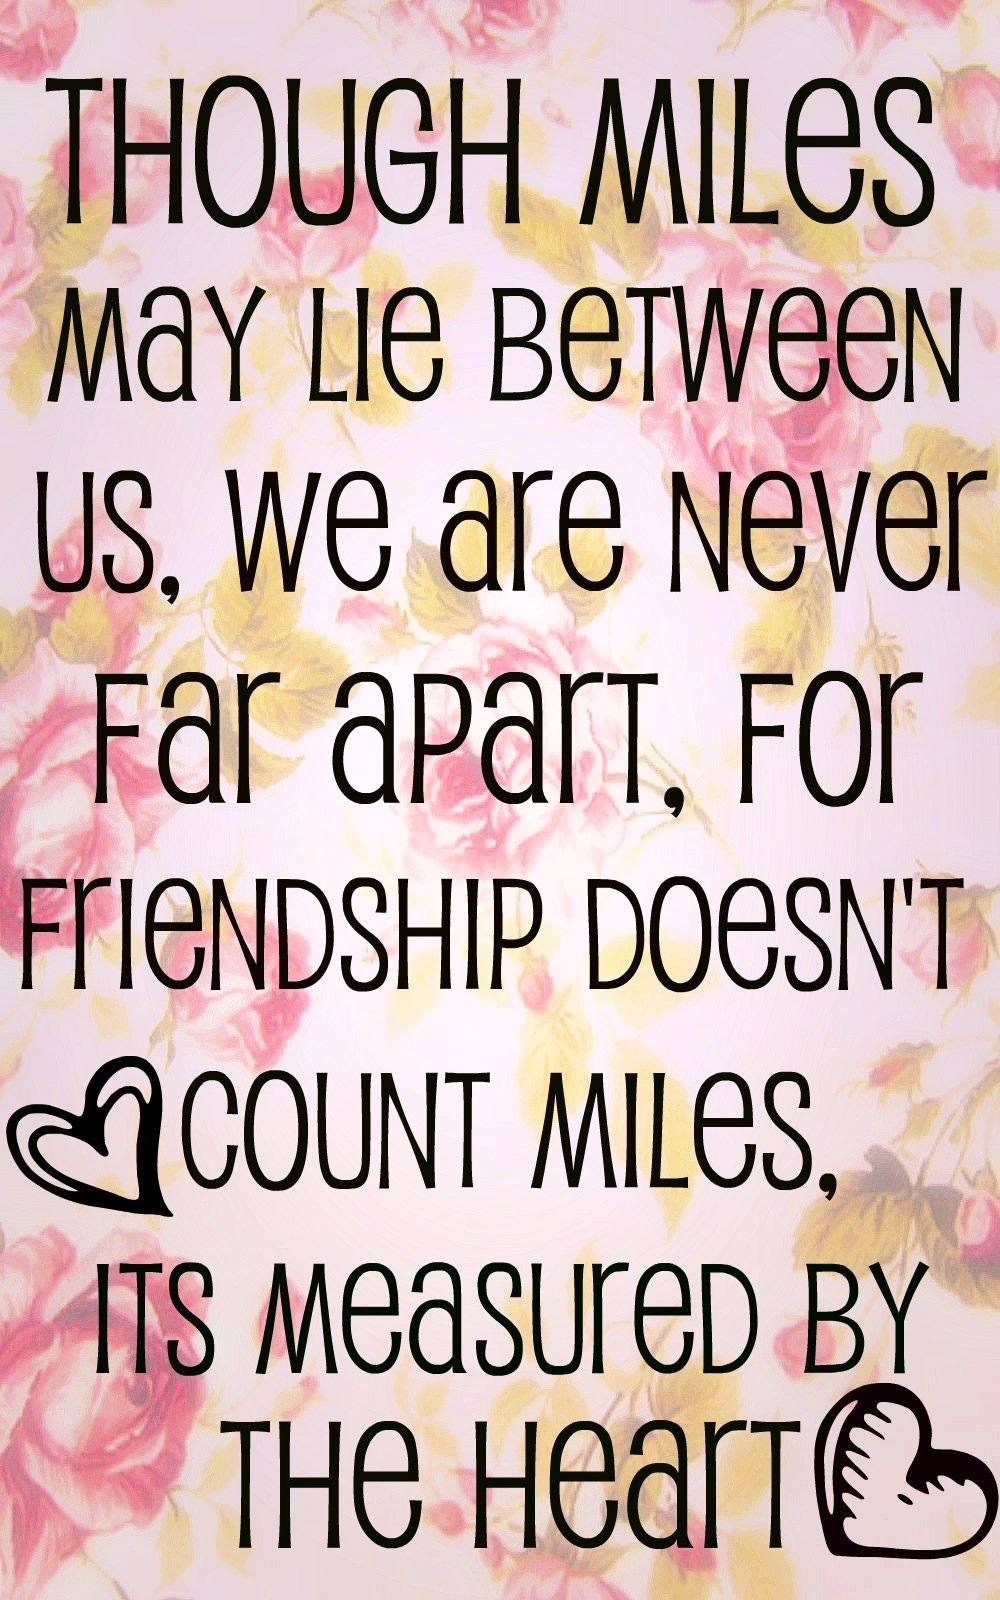 Long Distance Friendship Quote by mattielynngray on DeviantArt